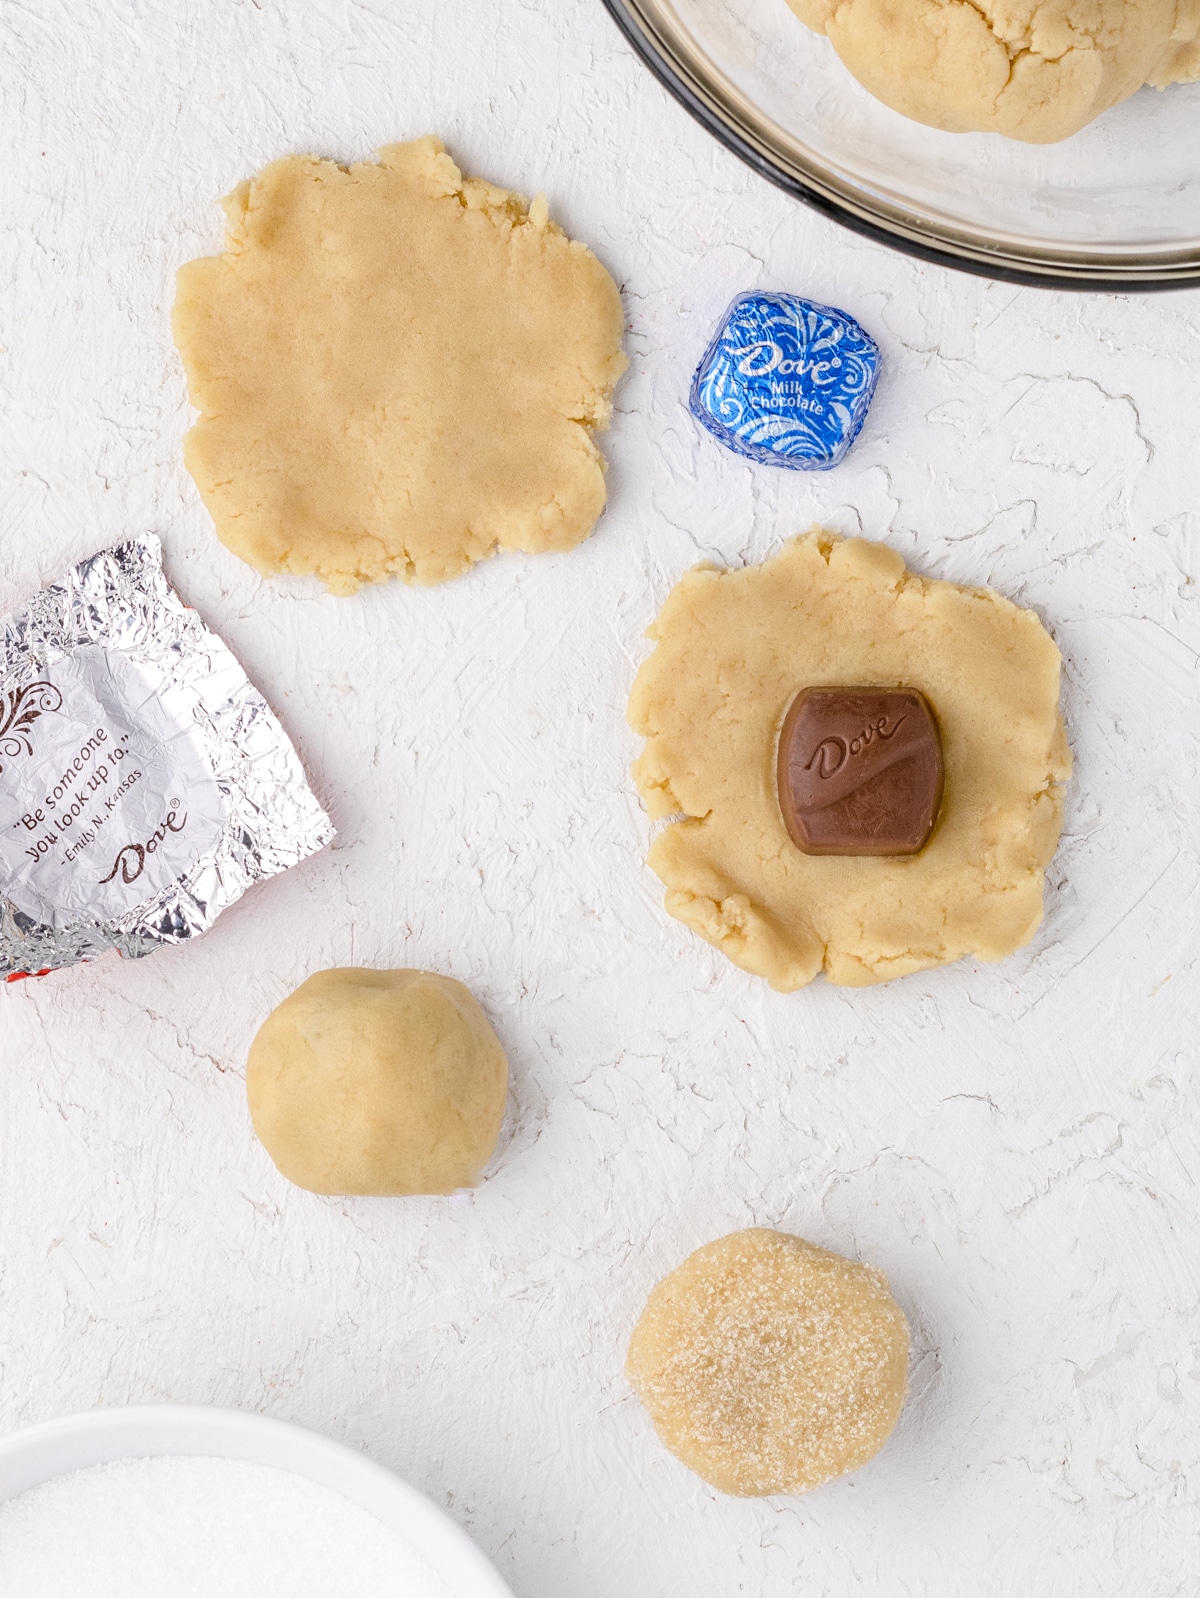 4 easy steps to stuff these cookies. Flatten a piece of dough, place chocolate in the center, form dough around chocolate, roll in granular sugar, and bake.